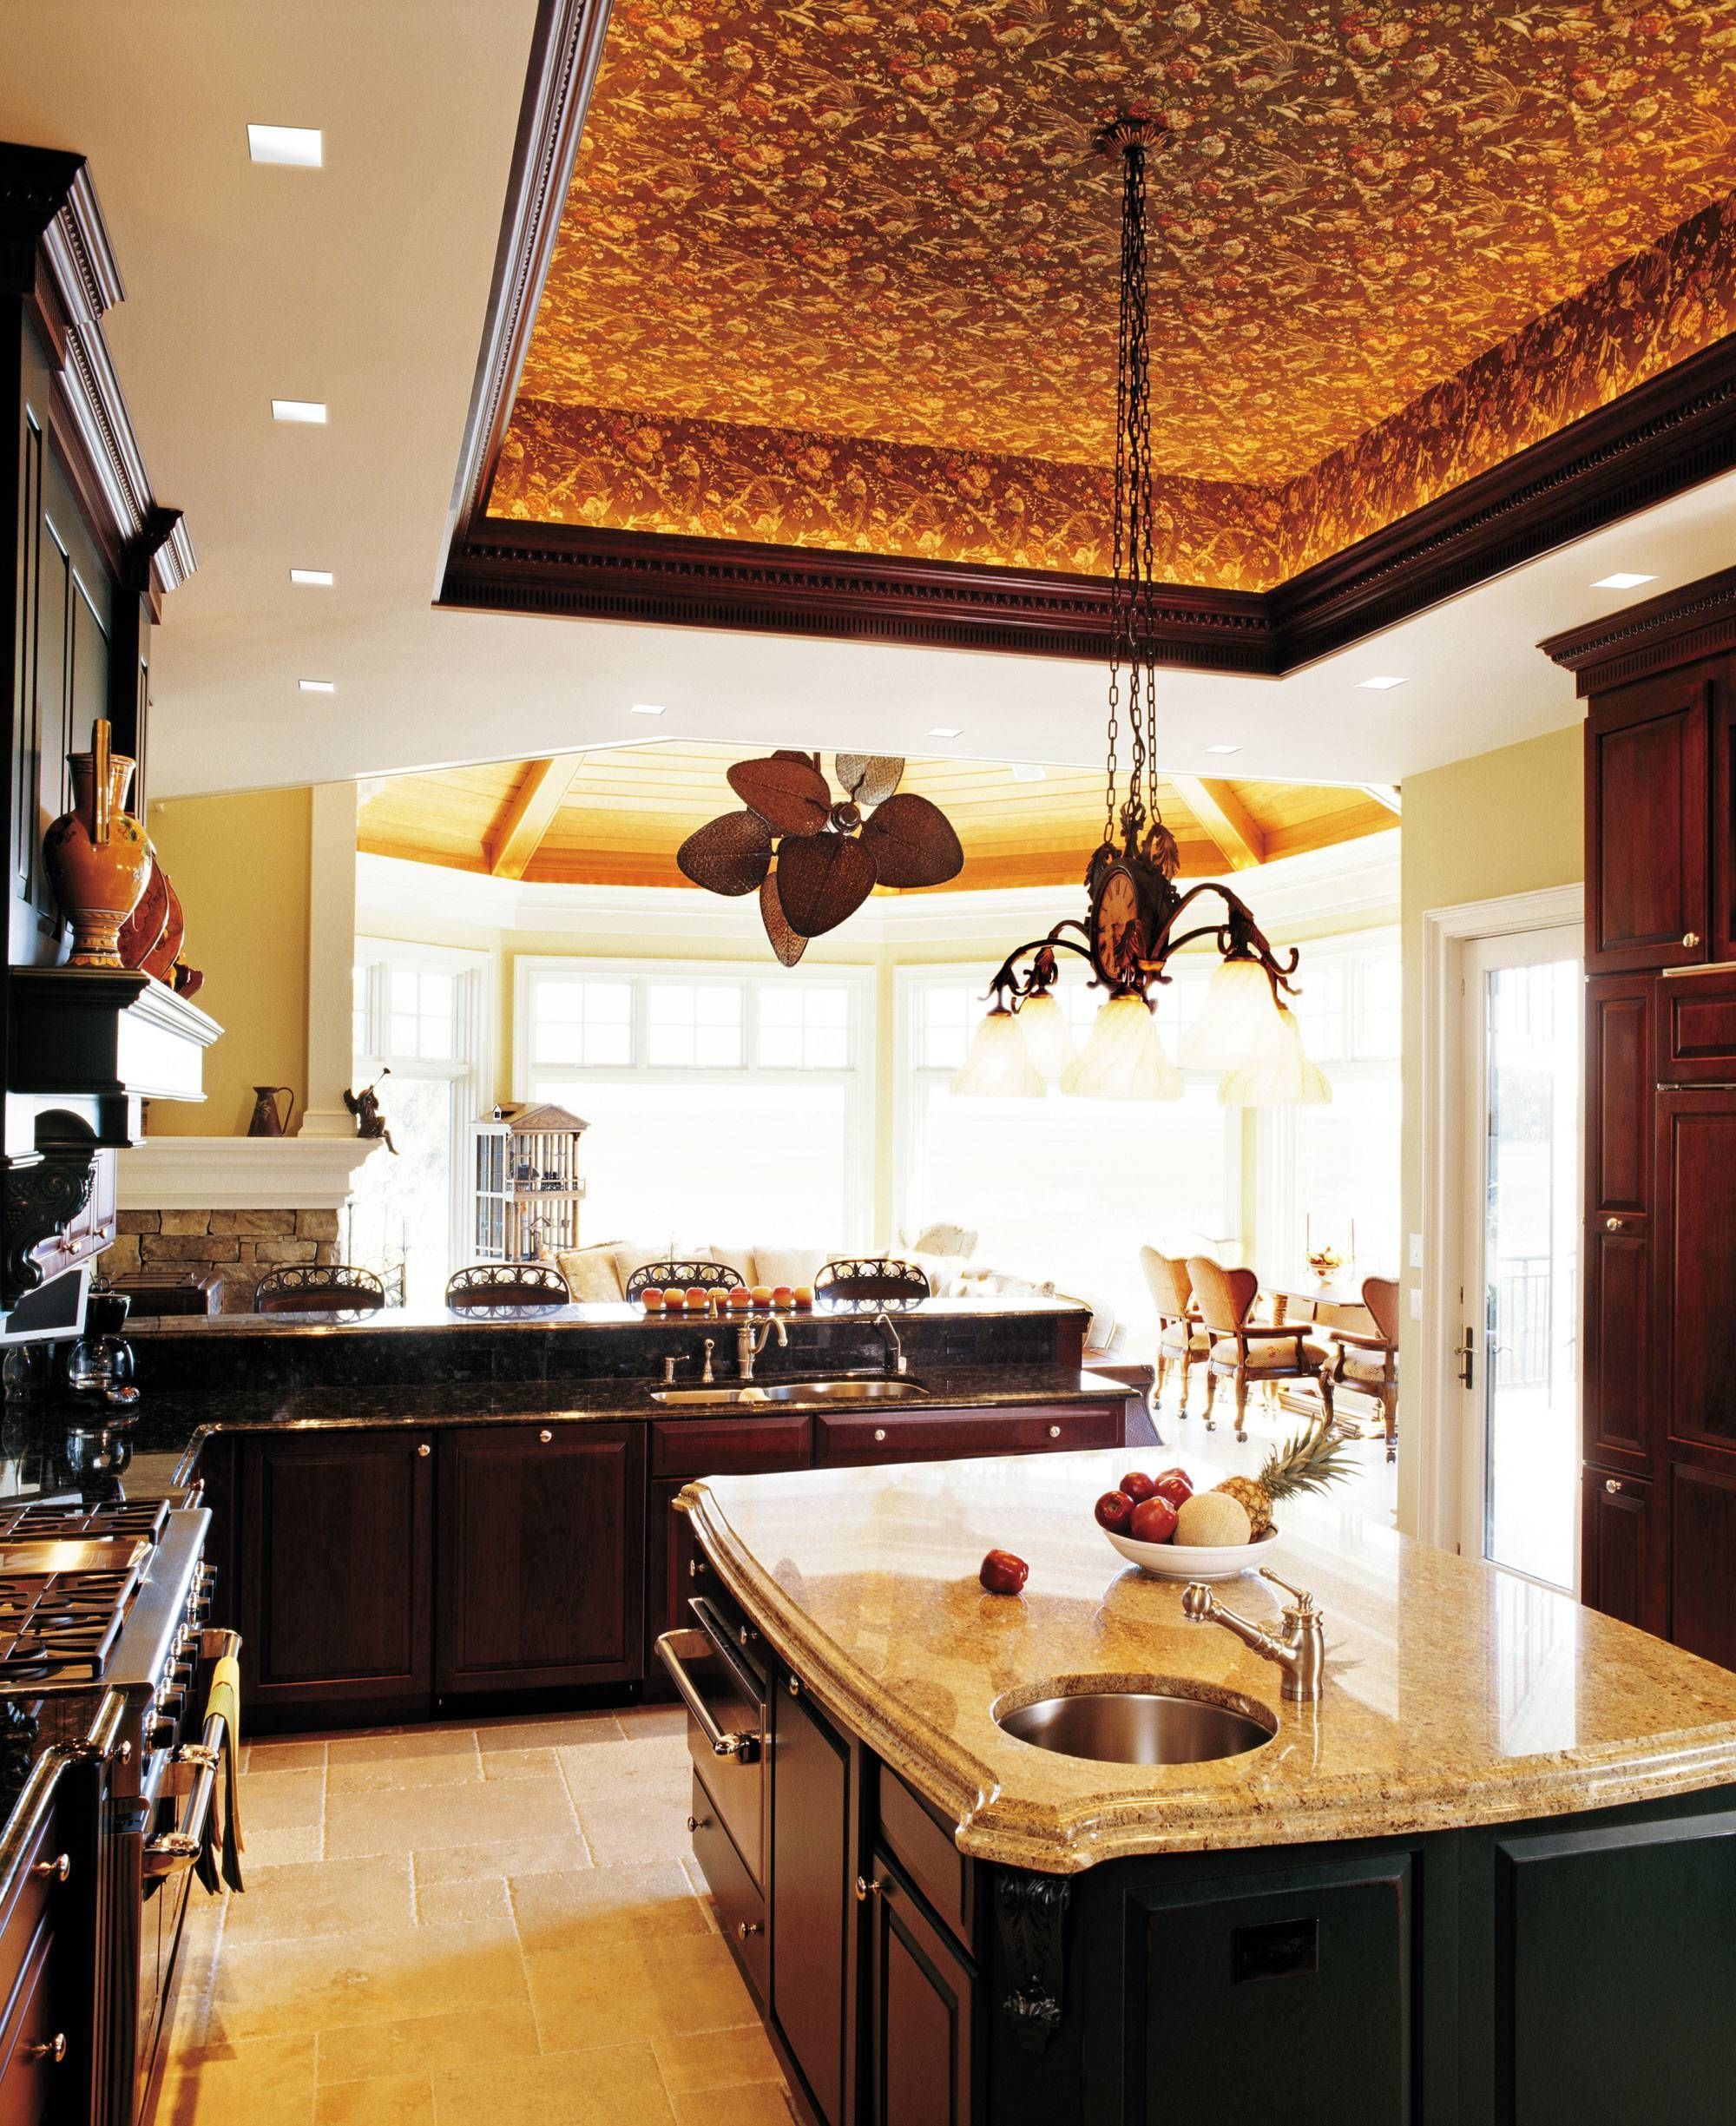 Kitchen Lighting: Pendant Light Fixtures For Church White Cabinets Throughout Church Pendant Lighting (View 14 of 15)